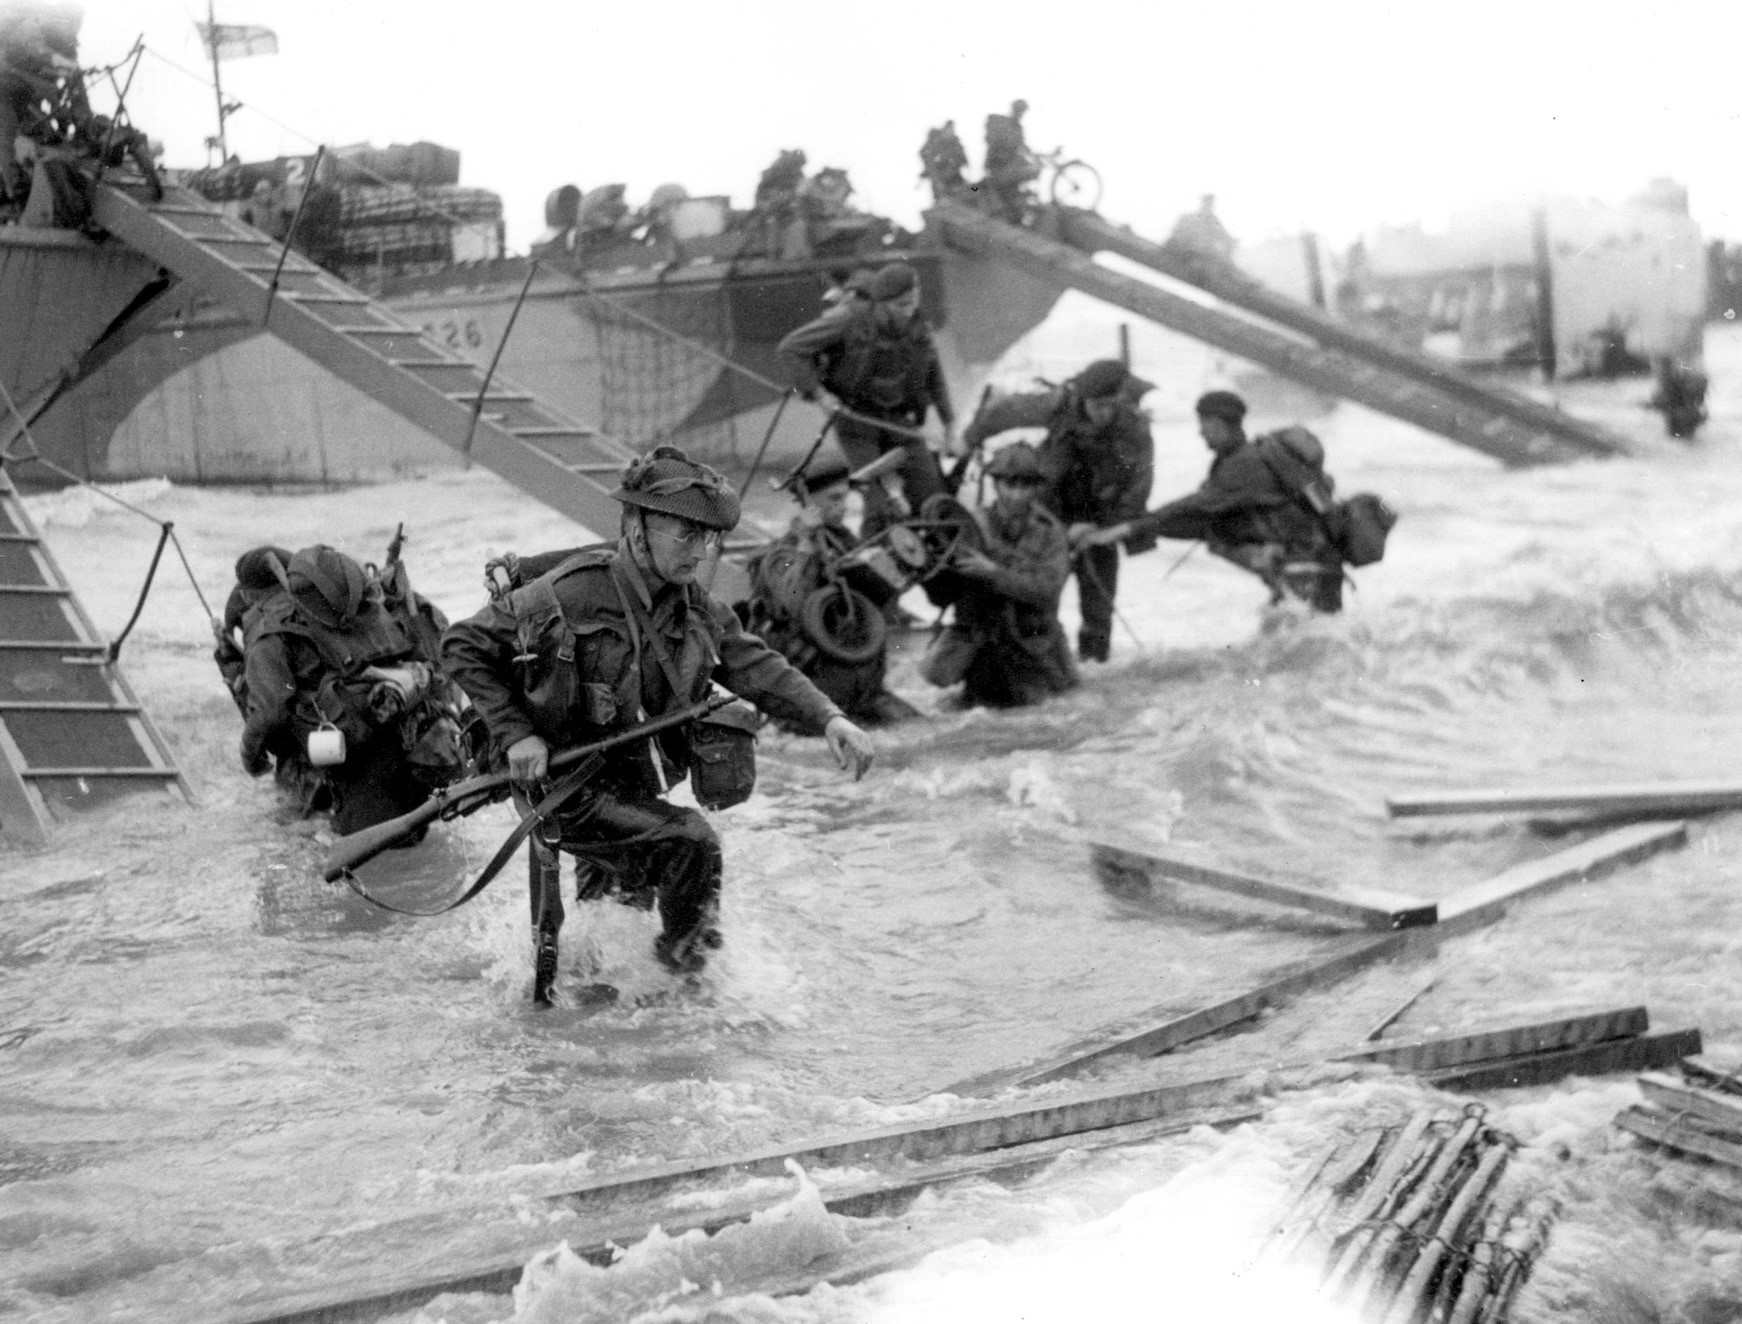 Soldiers wade through waves lapping at their knees in order to reach the Normandy beaches.